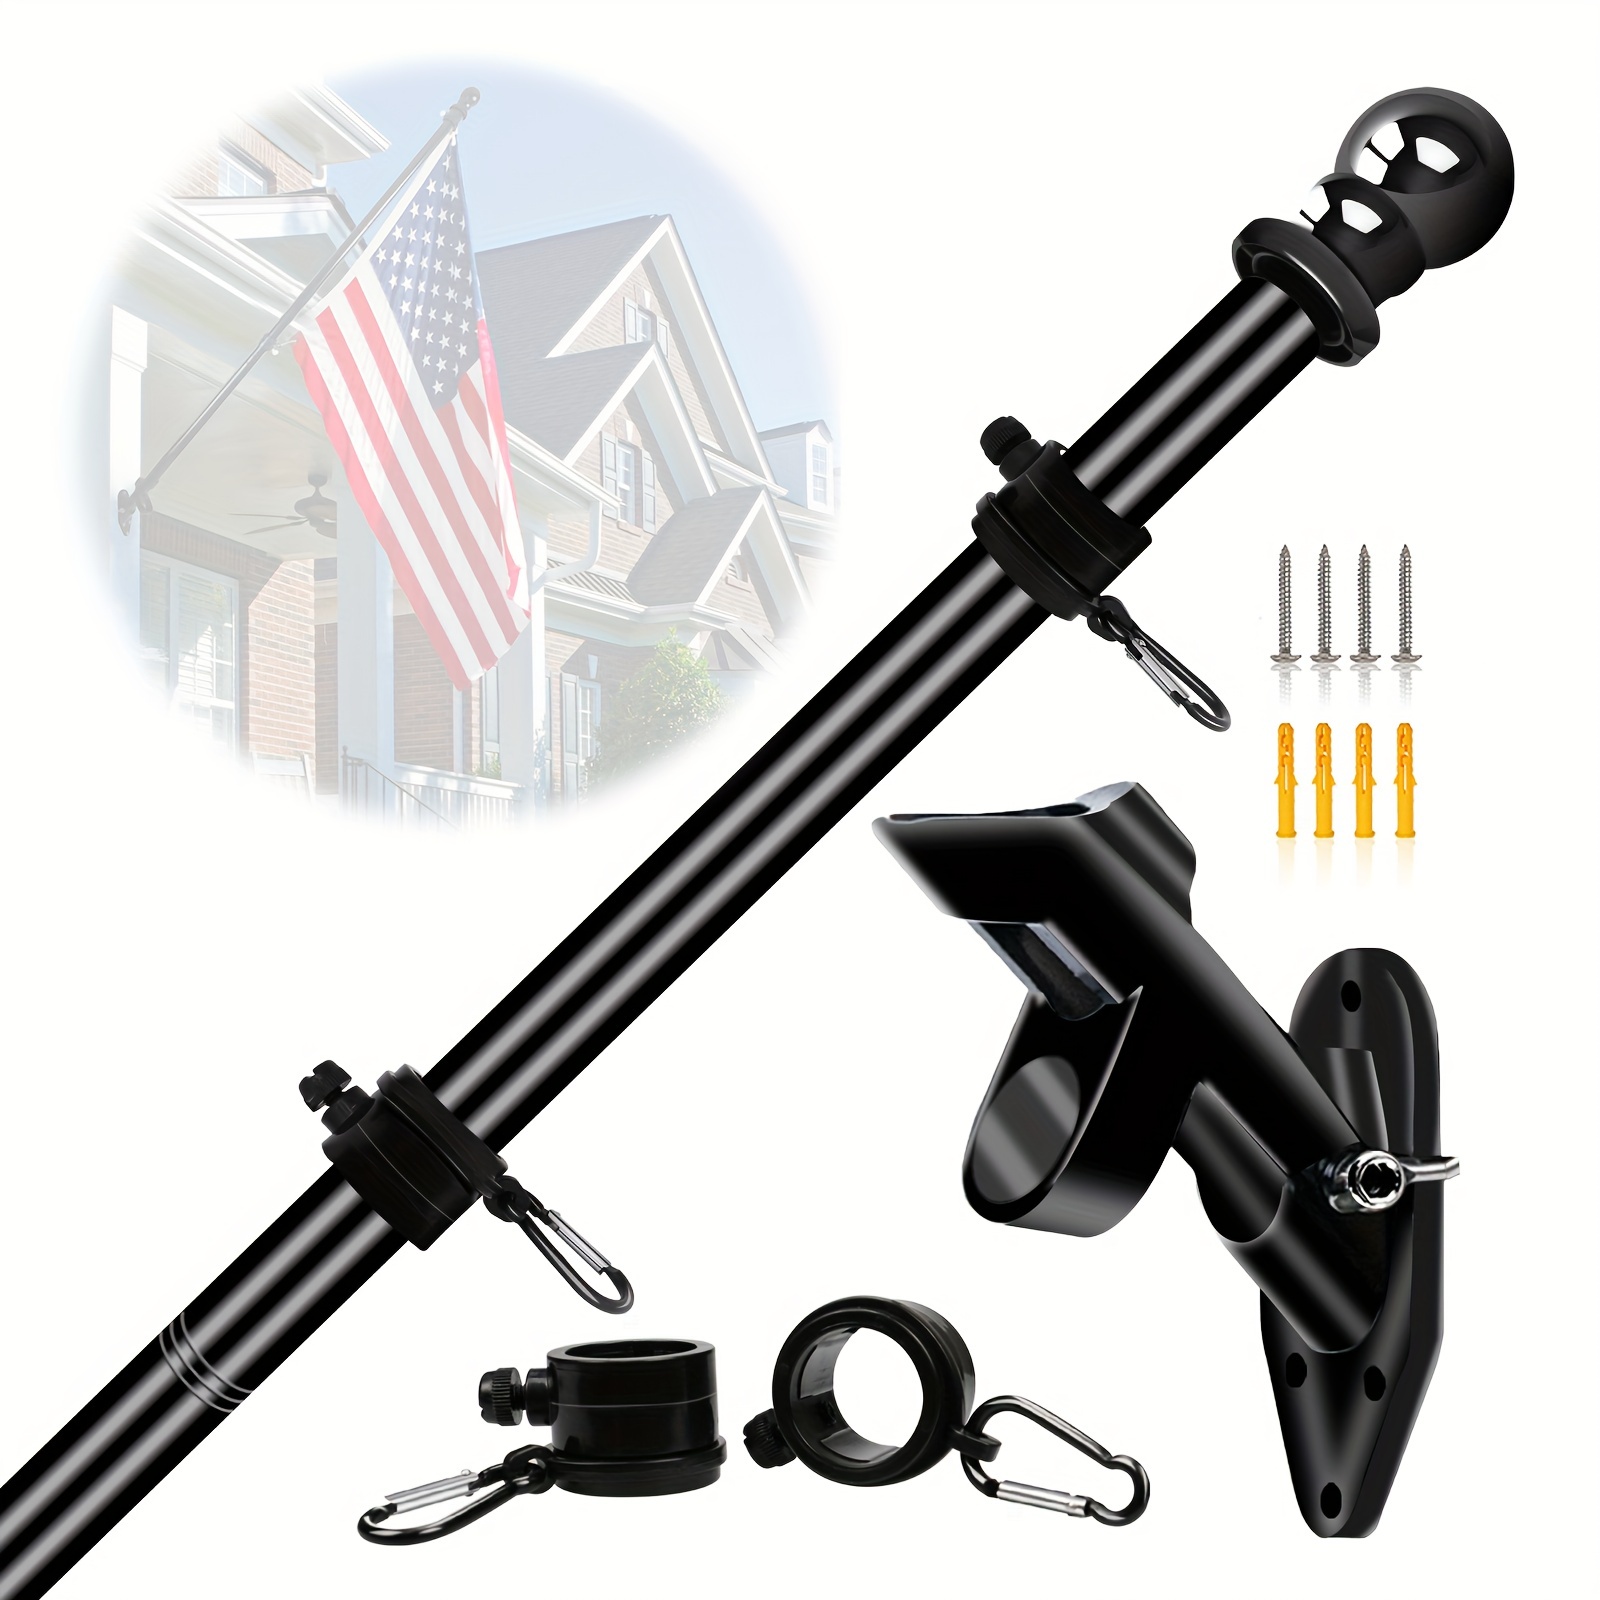 

1 Set Black Flagpole Kit For Outside House Stainless Steel Wall Mounted Flag Poles With Bracket & Flag Mounting Rings For Porch Yard Garden Outdoor Residential Or Commercial (no Flag), 5ft